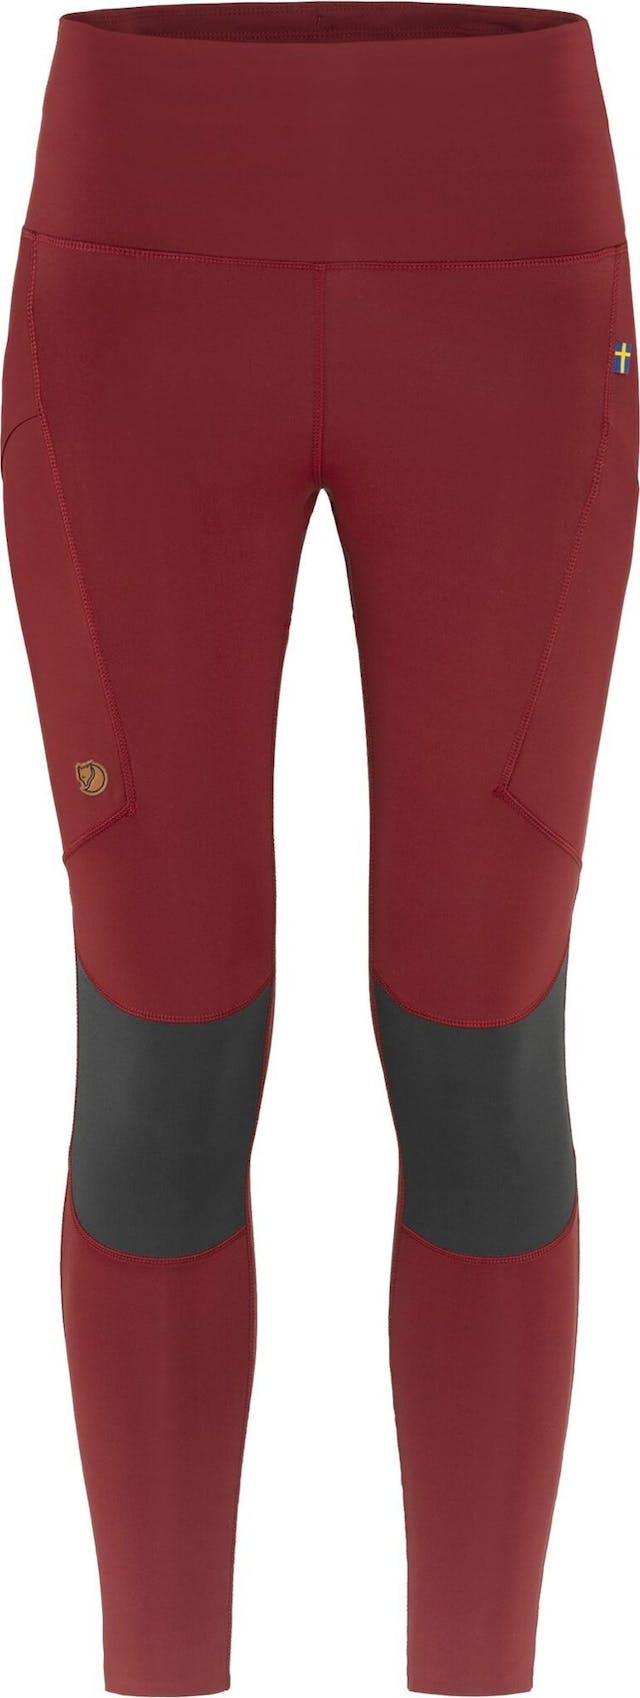 Product image for Abisko Trekking Pro Tights - Women's